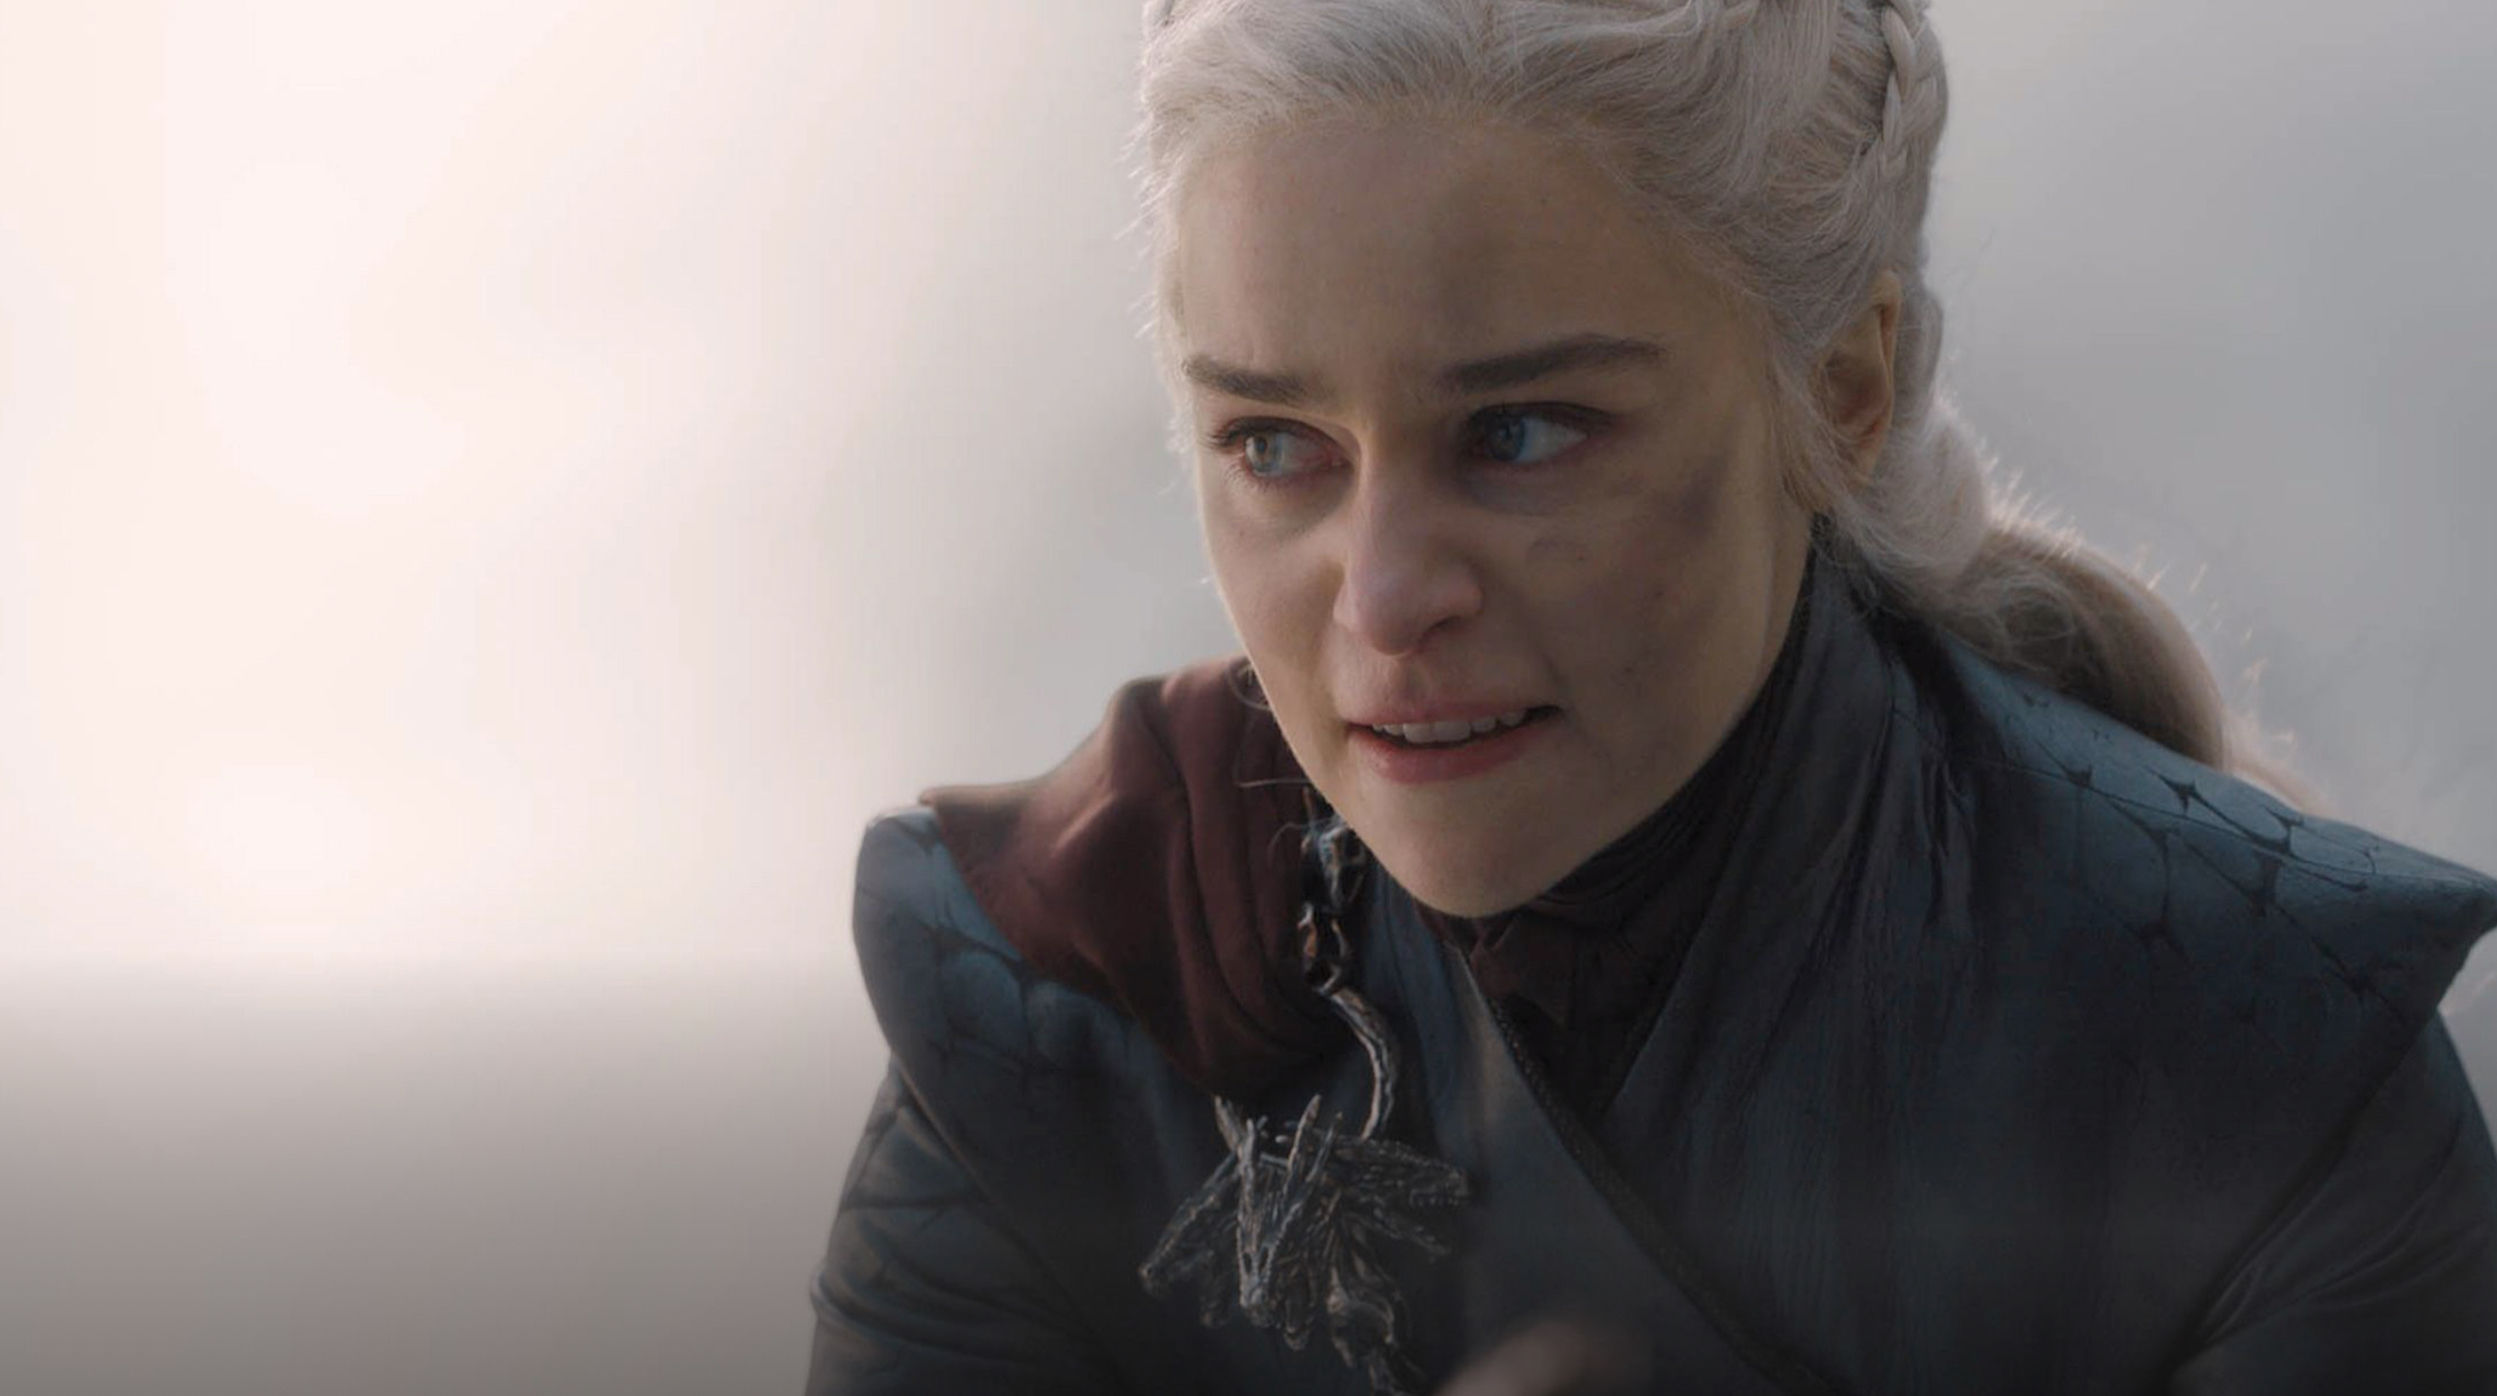 Emilia Clarke as Daenerys in Game of Thrones on HBO